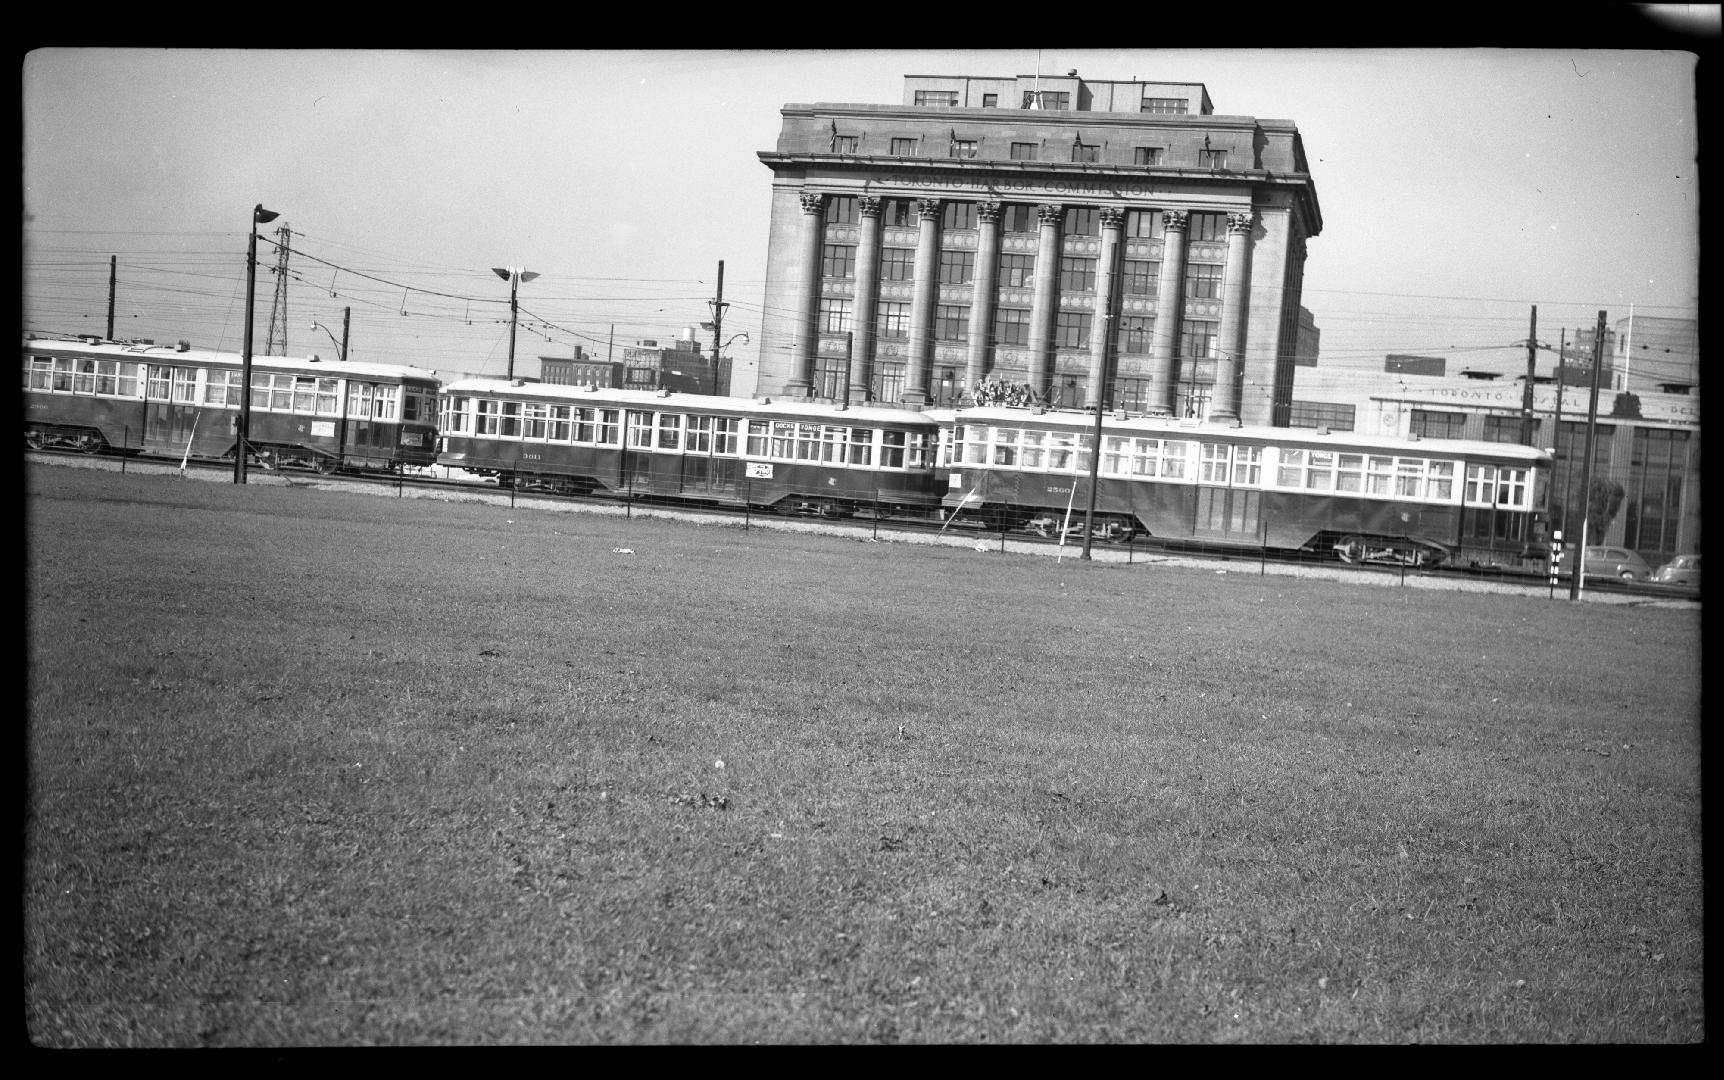 Image shows a multi-floor building with some streetcars in front of it.